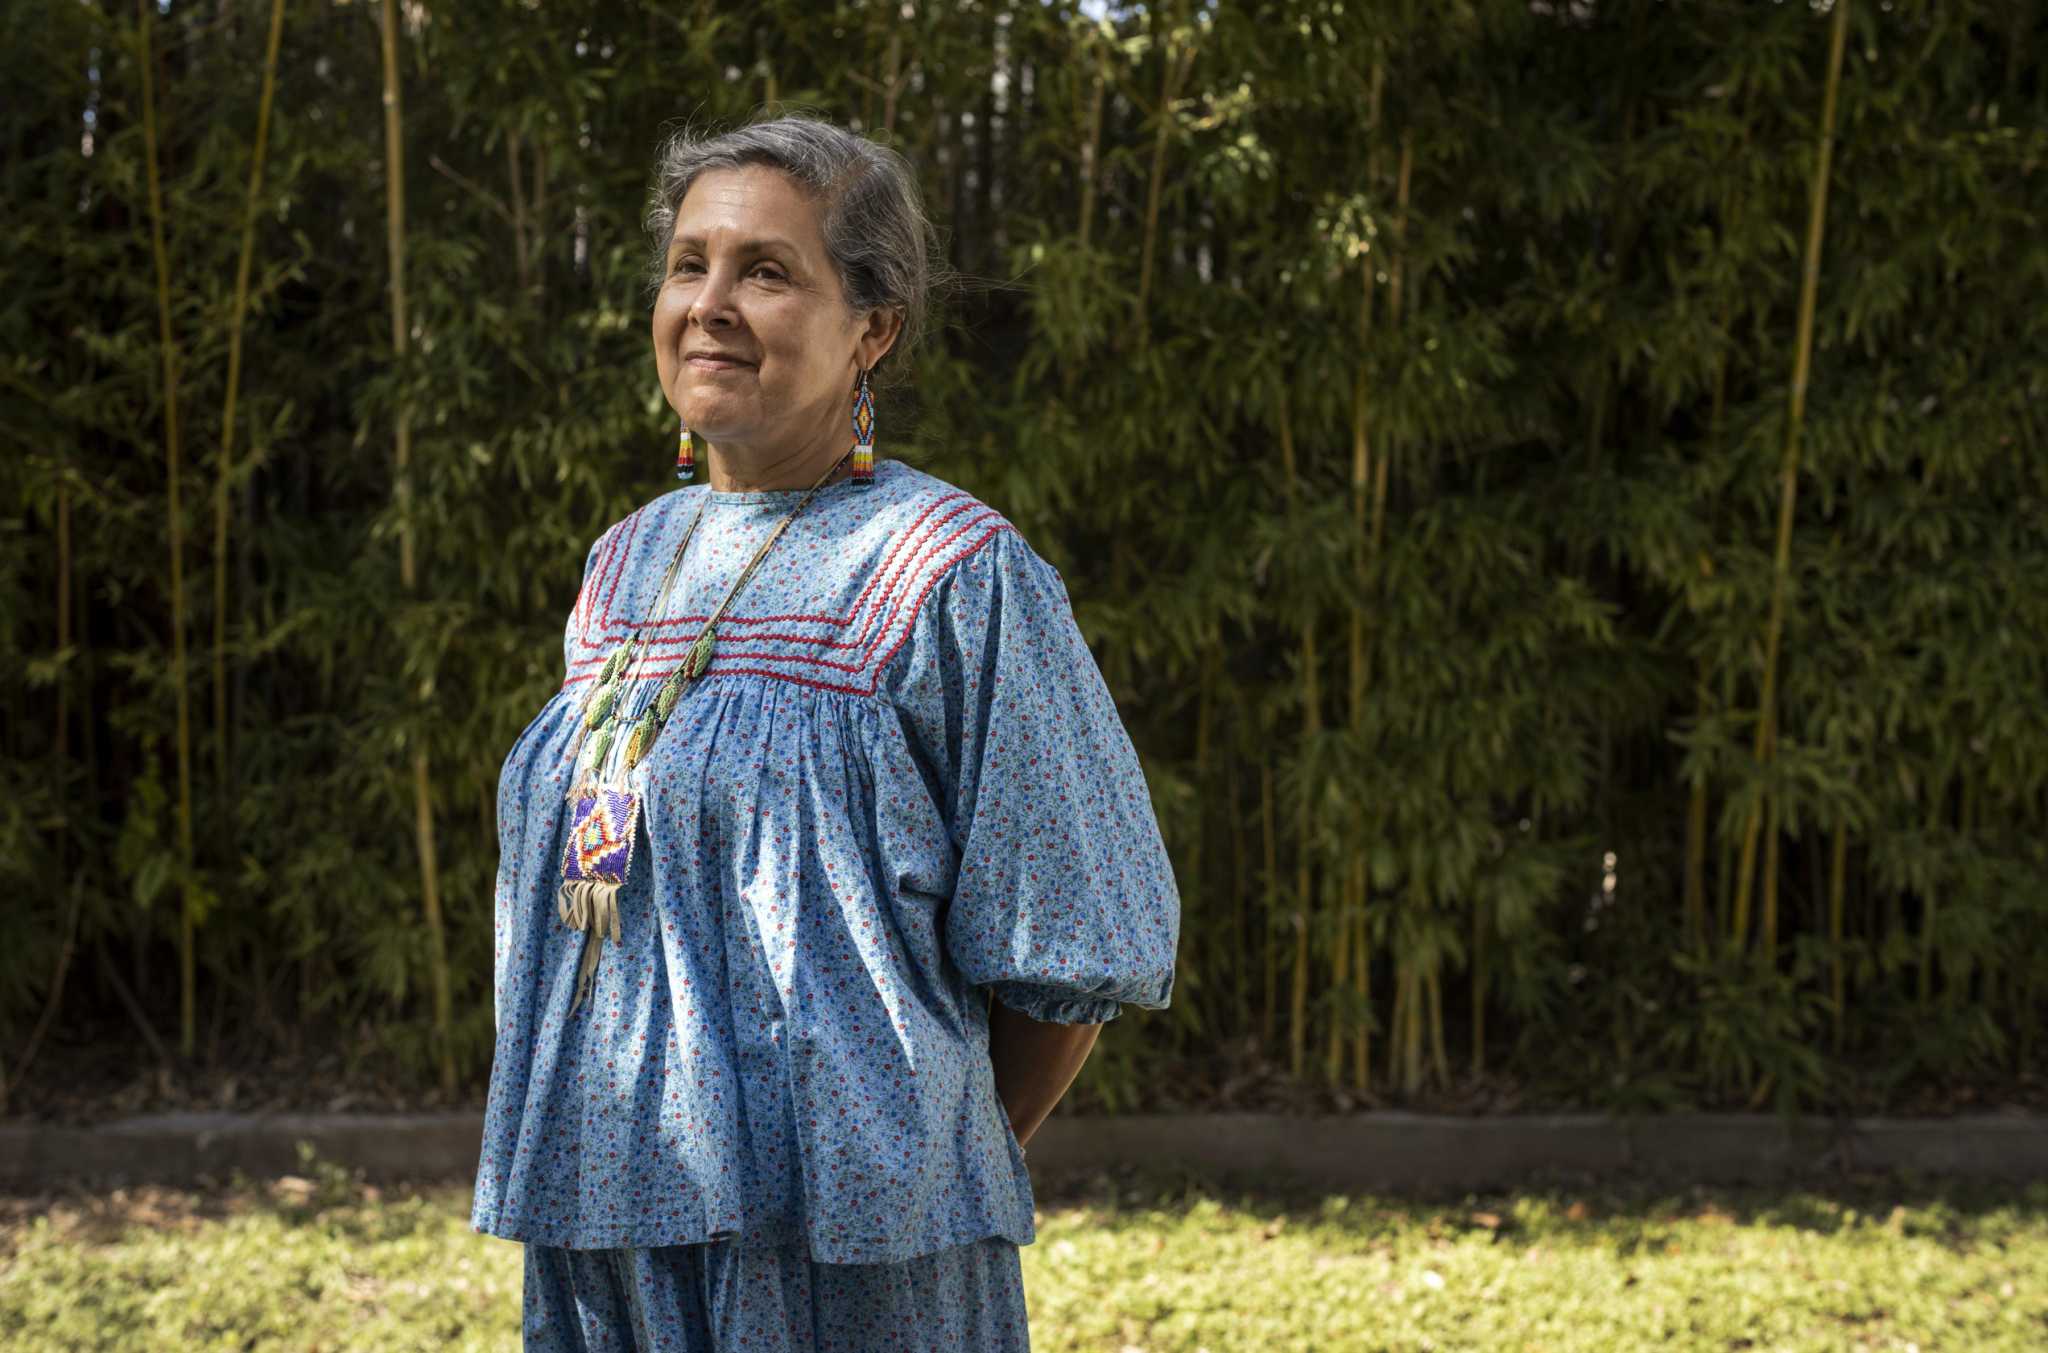 Native American medicine woman passes on the craft of Indigenous healing